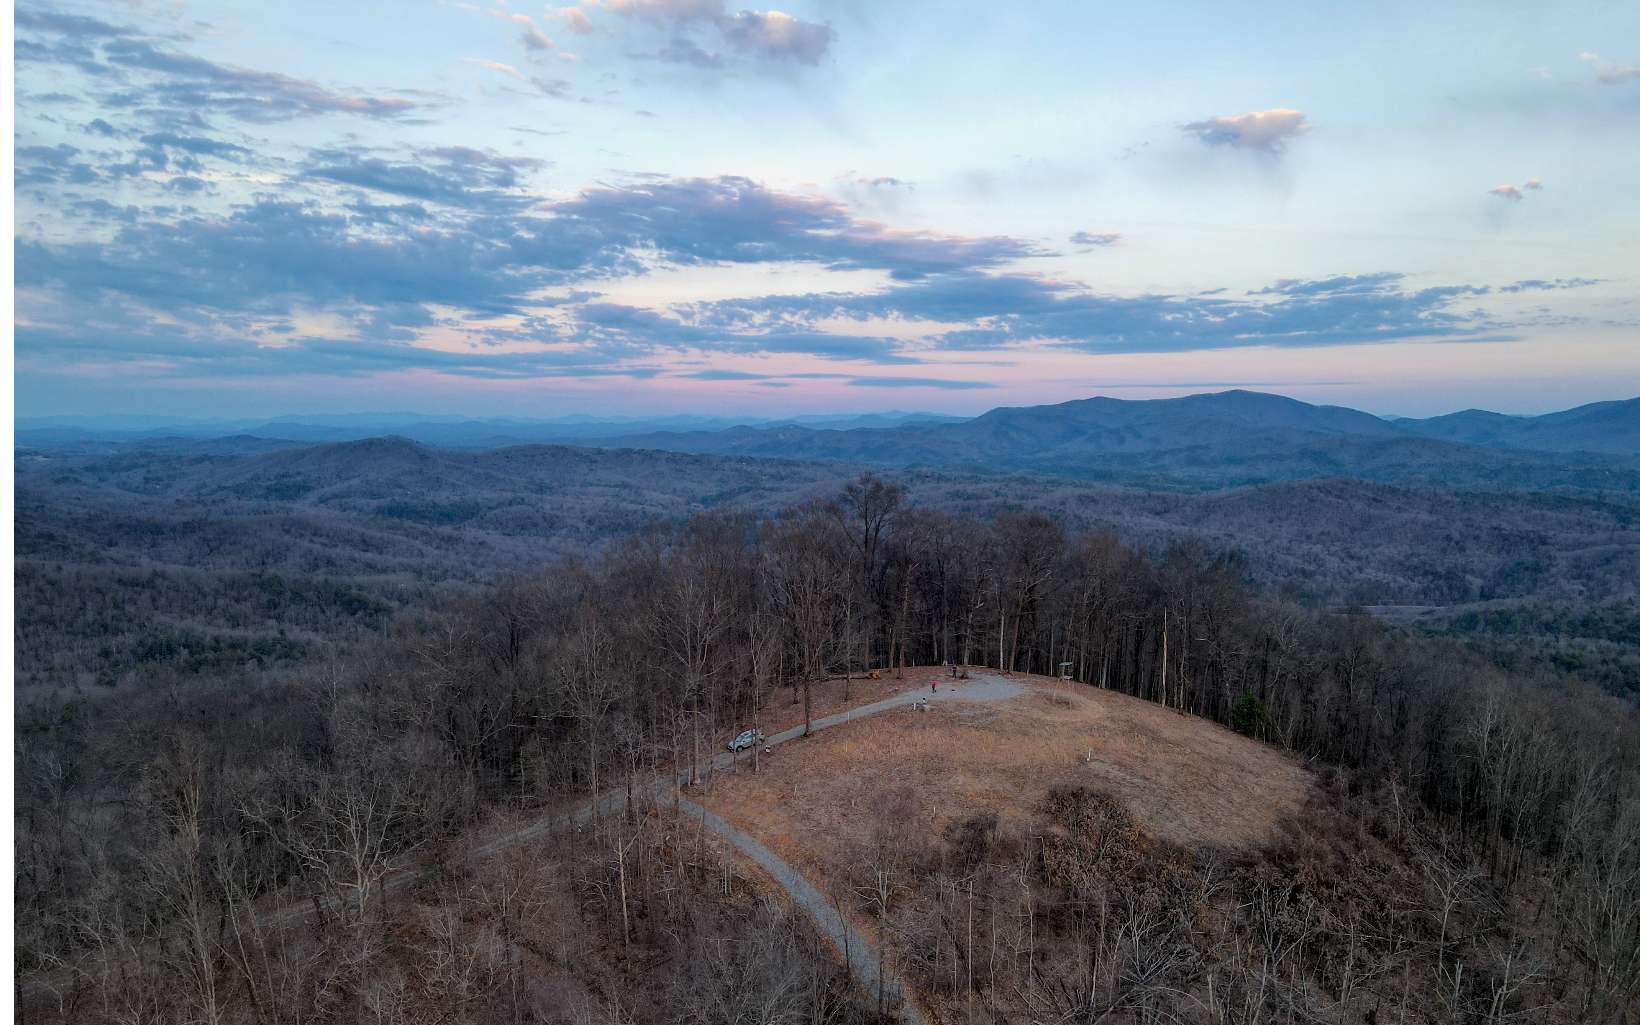 Ready to be wowed with amazing 360 degree views!! This unique 2550 ft elevation lot has 1.49 acres that encompasses the entire top of Double Knob Mountain in the exclusive “Eagles View “ Subdivision. This lot is already cleared for incredible views of the Cohutta Wilderness to the North and the Rich Mountain Wilderness to the South. Underground power, telephone already in place, and a has a new 10 gpm well with excellent tasting Spring water. Lots 5 and 6 are also available. Gate at end of road for added privacy. MUST BE ACCOMPANIED BY LICENSED AGENT TO VIEW PROPERTY.